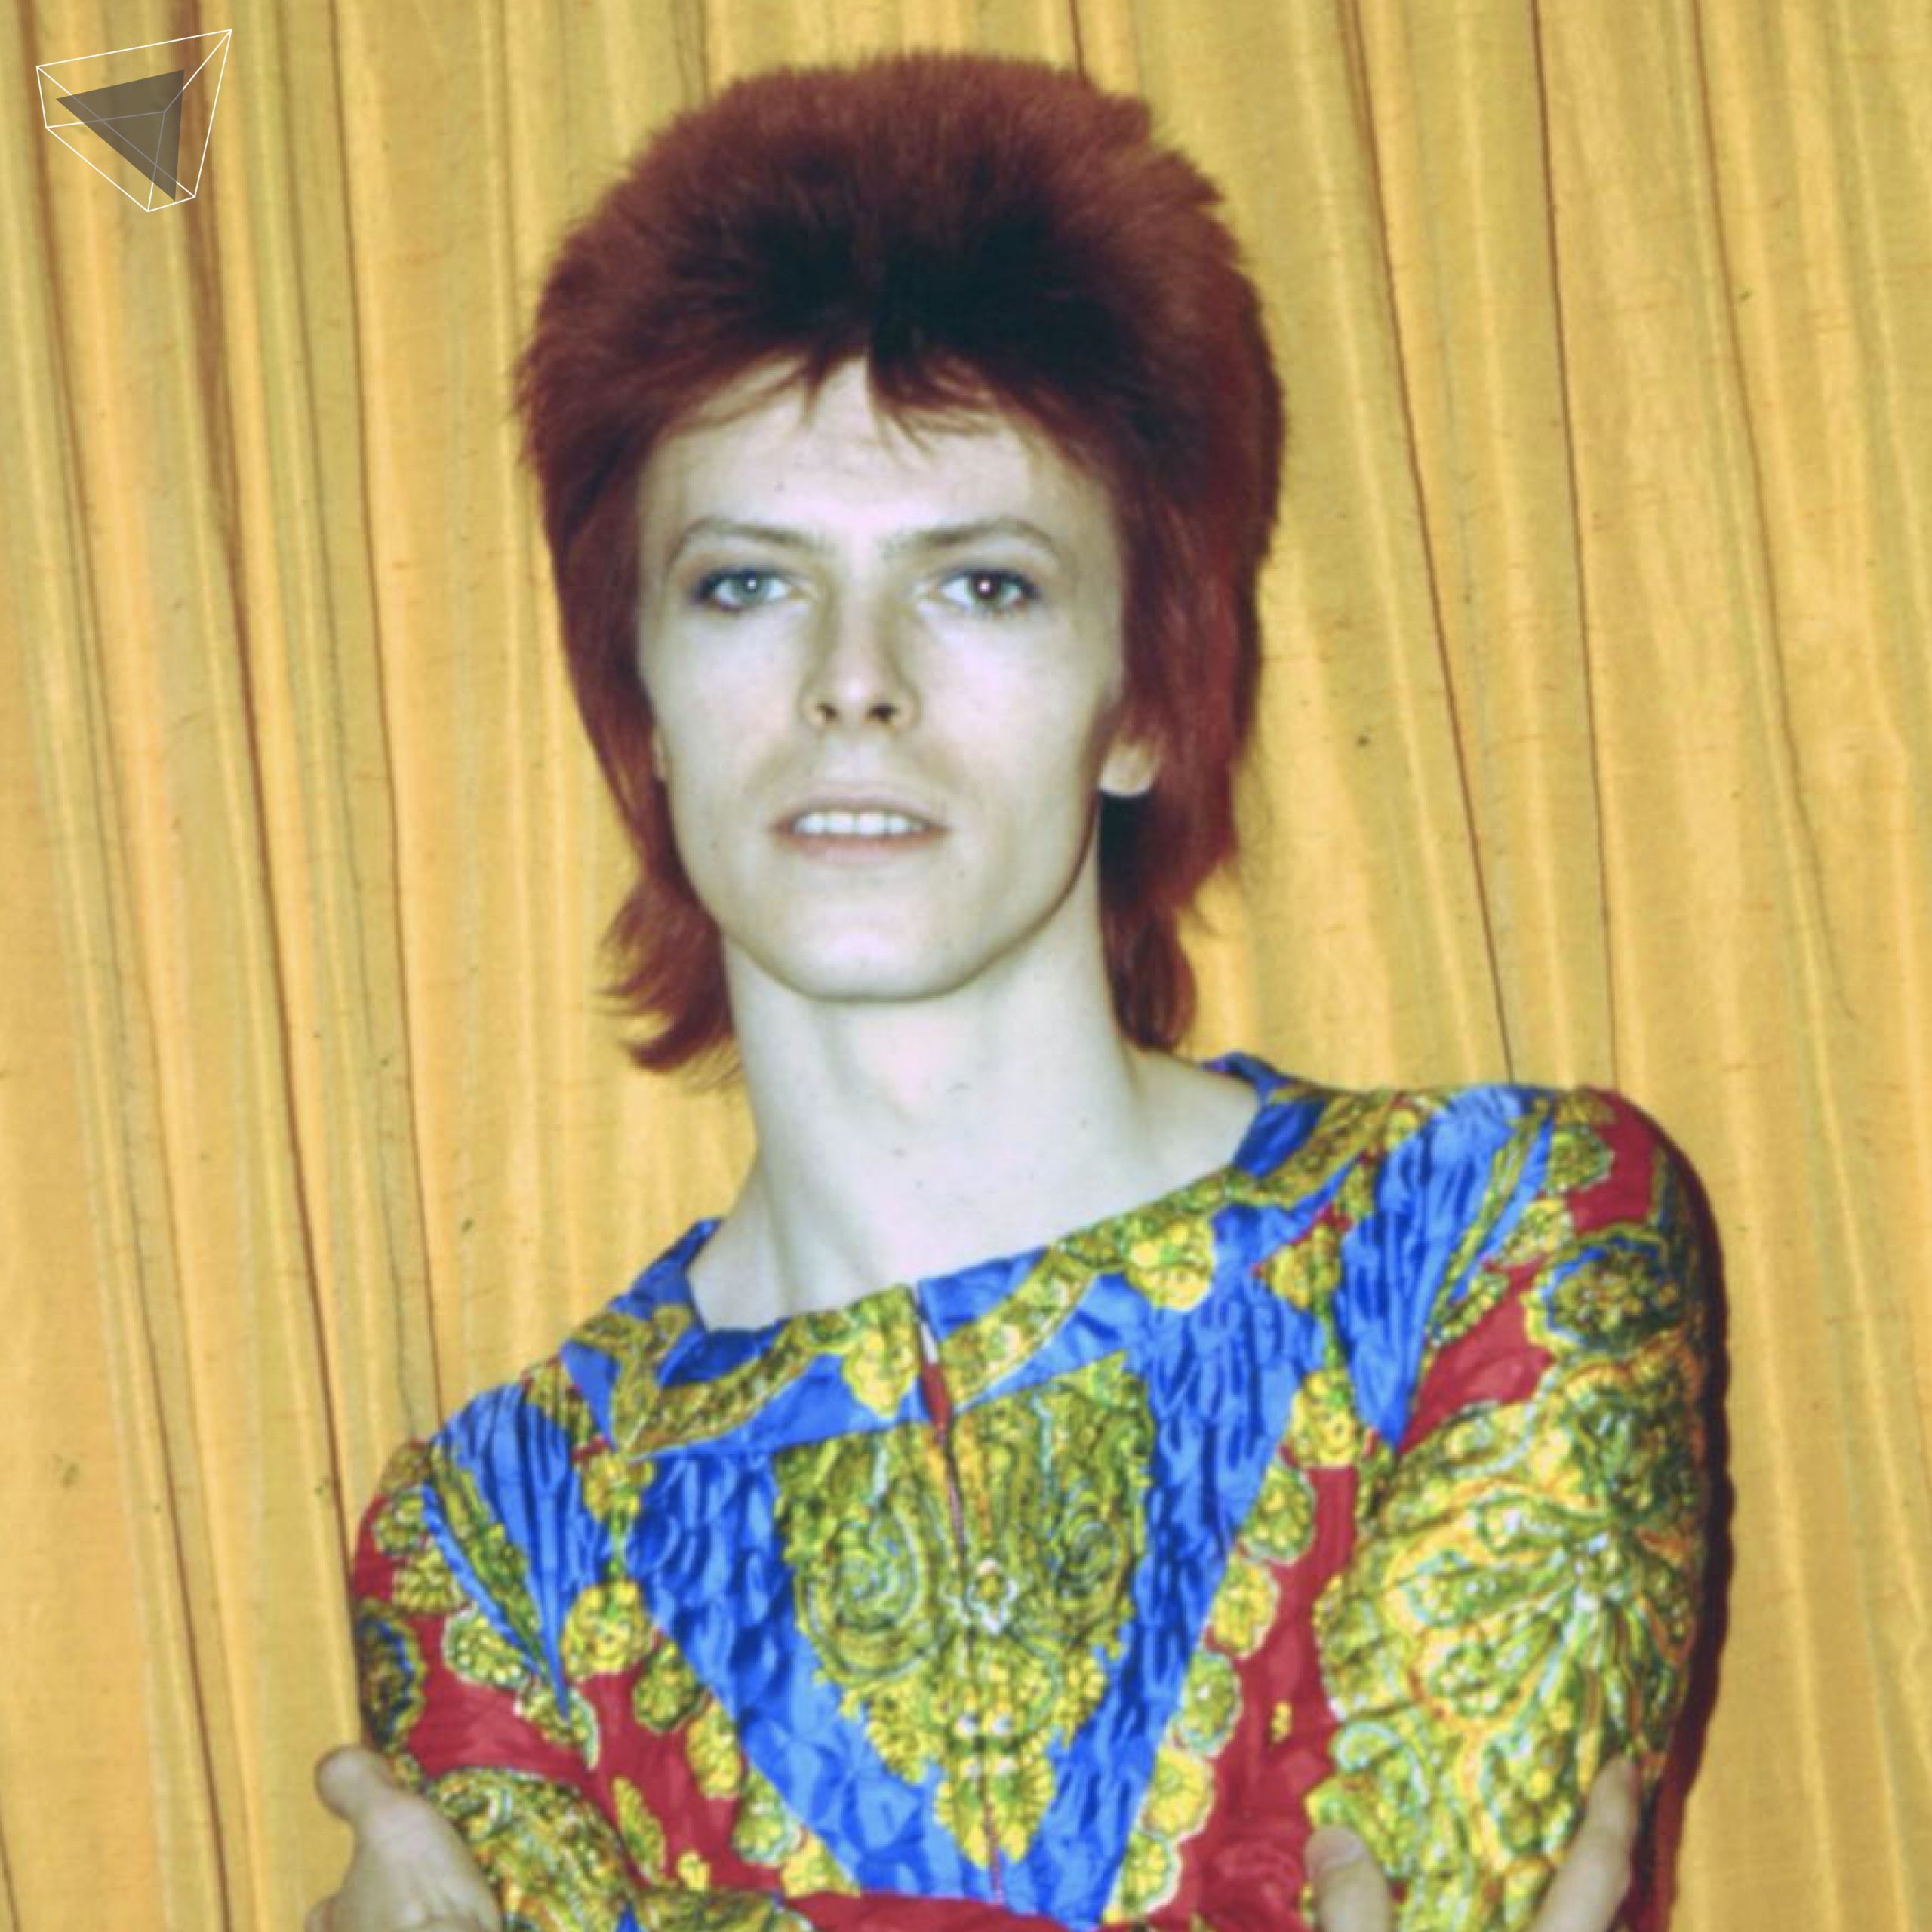 David Bowie Ziggy Stardust with Mullet hair